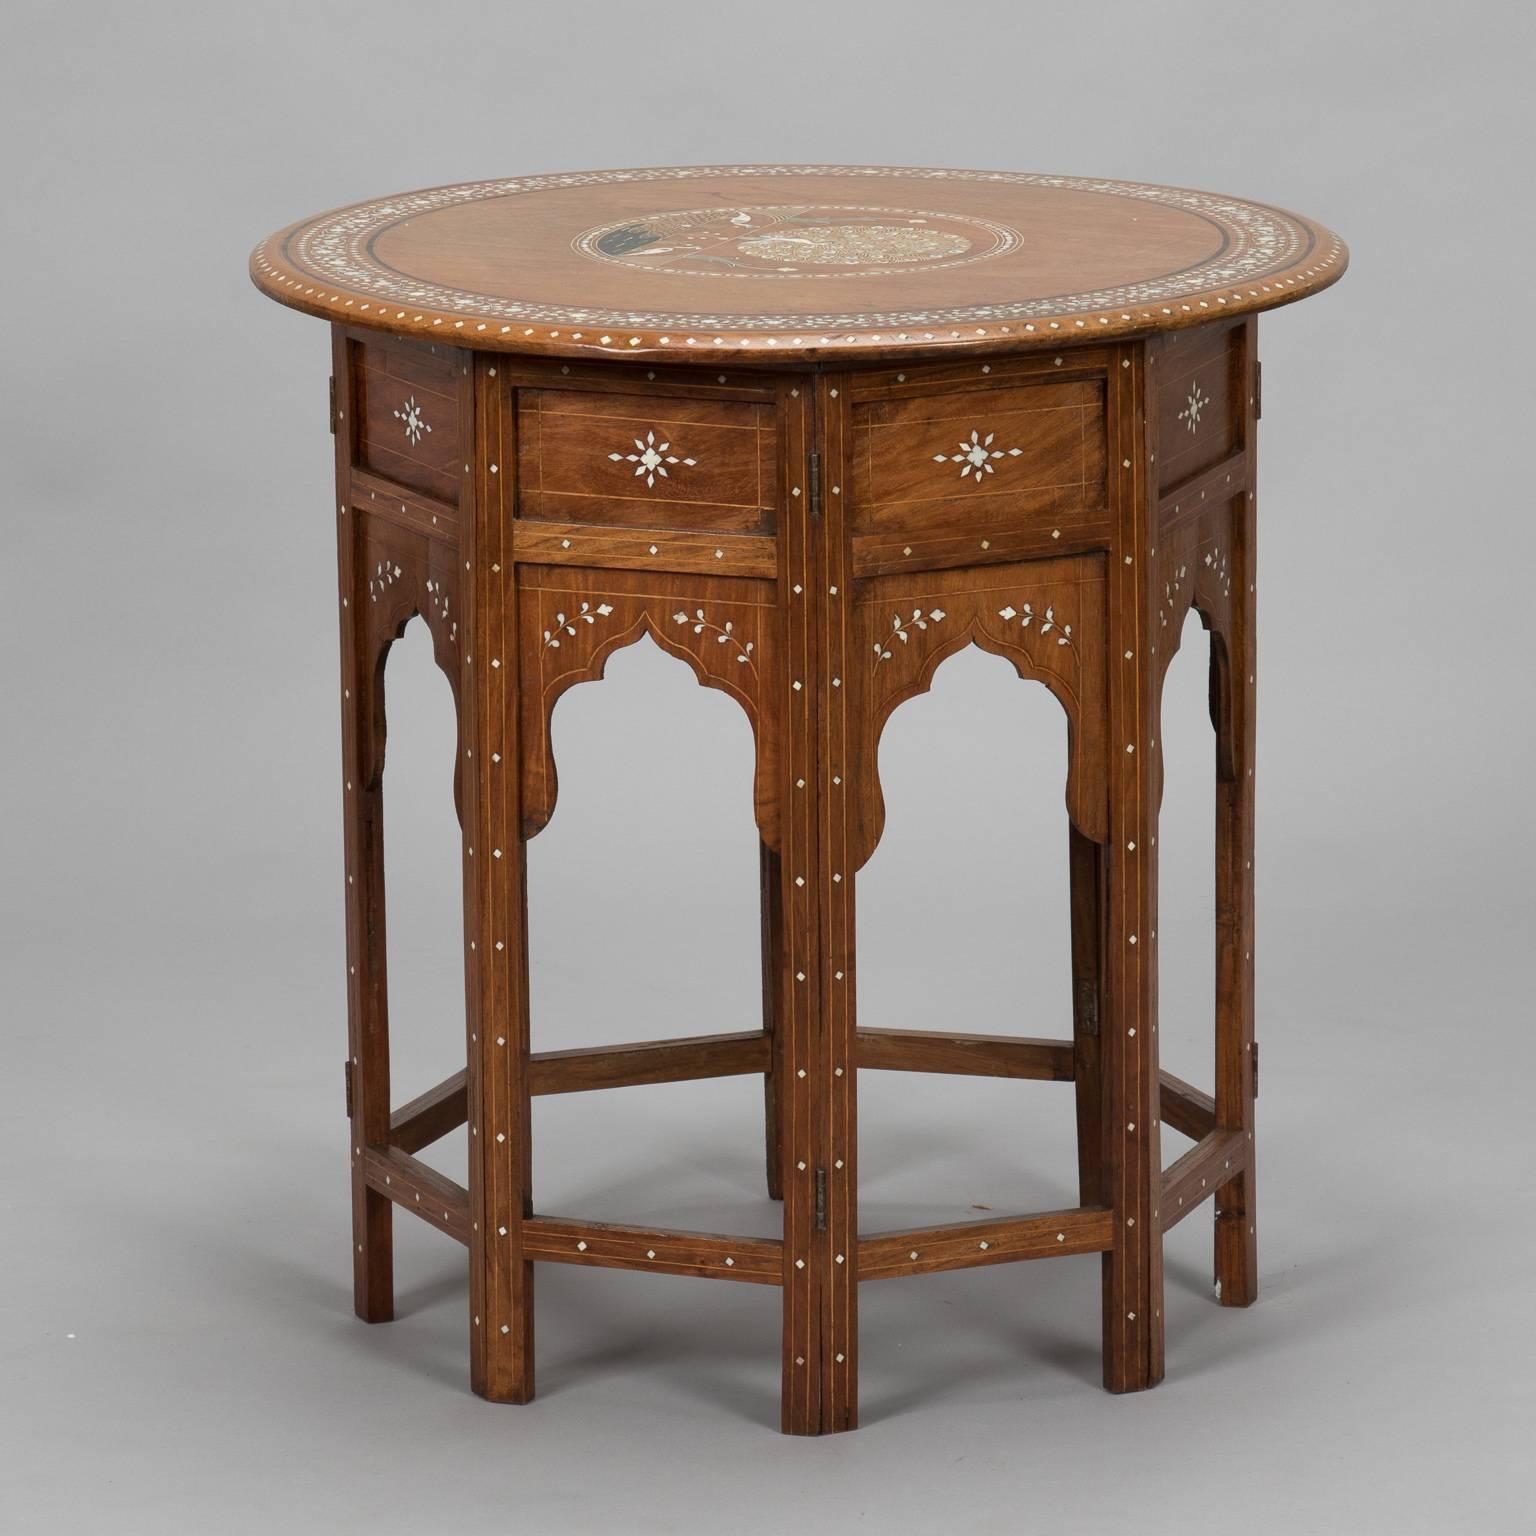 Small Indian made side table has hinged based with removable top which makes it easy to ship and store, circa 1950s. Wood has intricate, finely rendered bone and wood inlay design of peacocks, vines and borders.